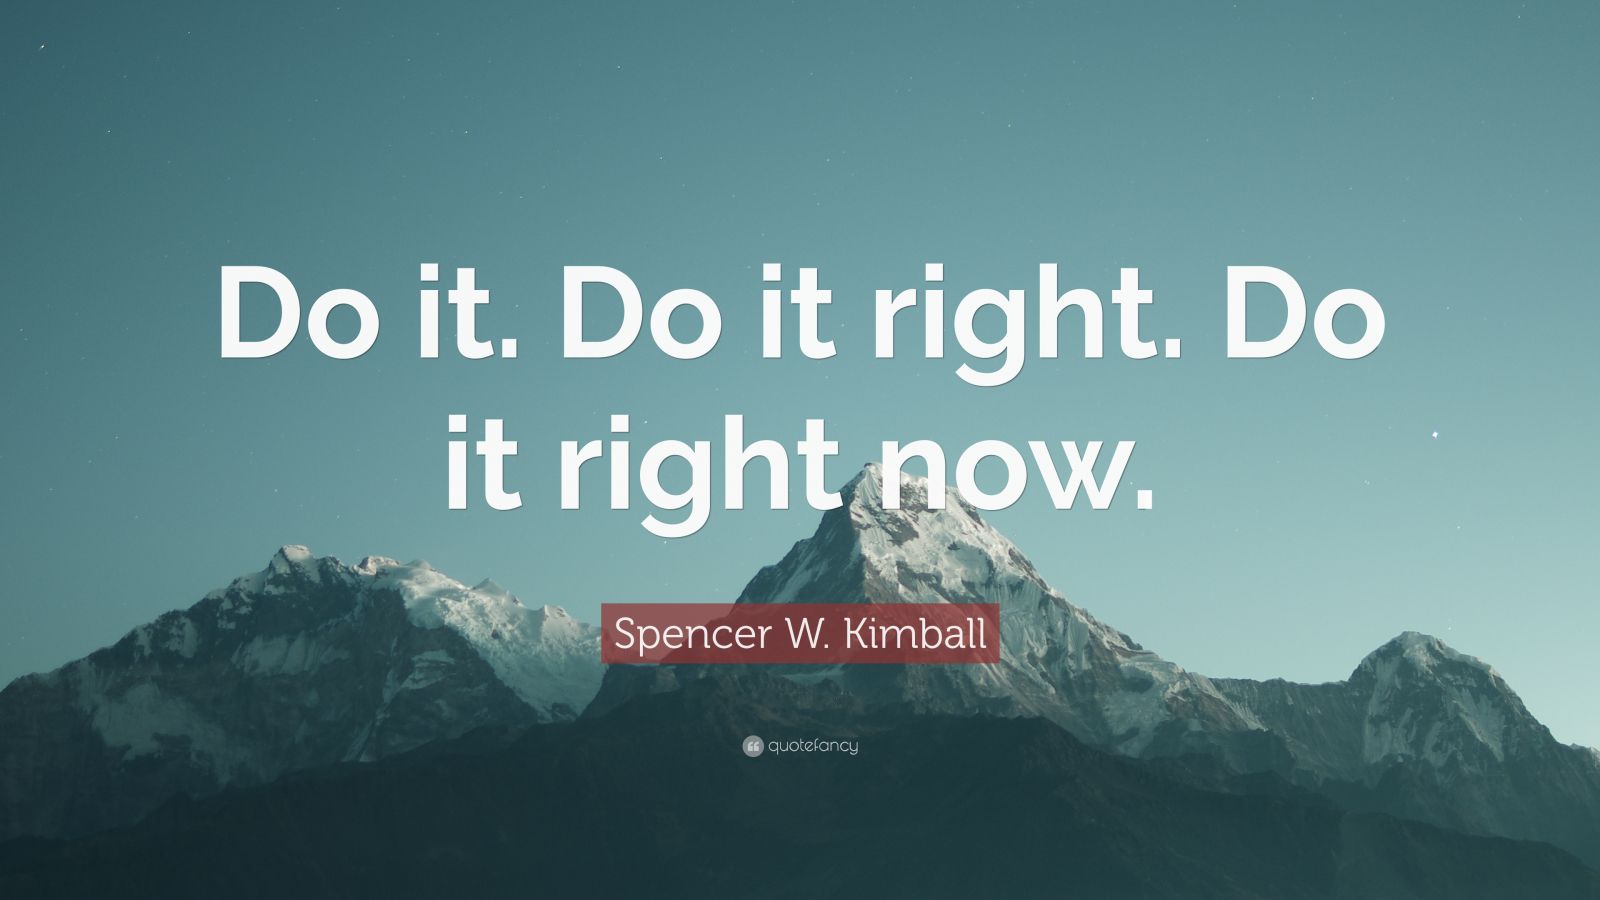 Spencer W. Kimball Quote: “Do it. Do it right. Do it right now.” (12 ...